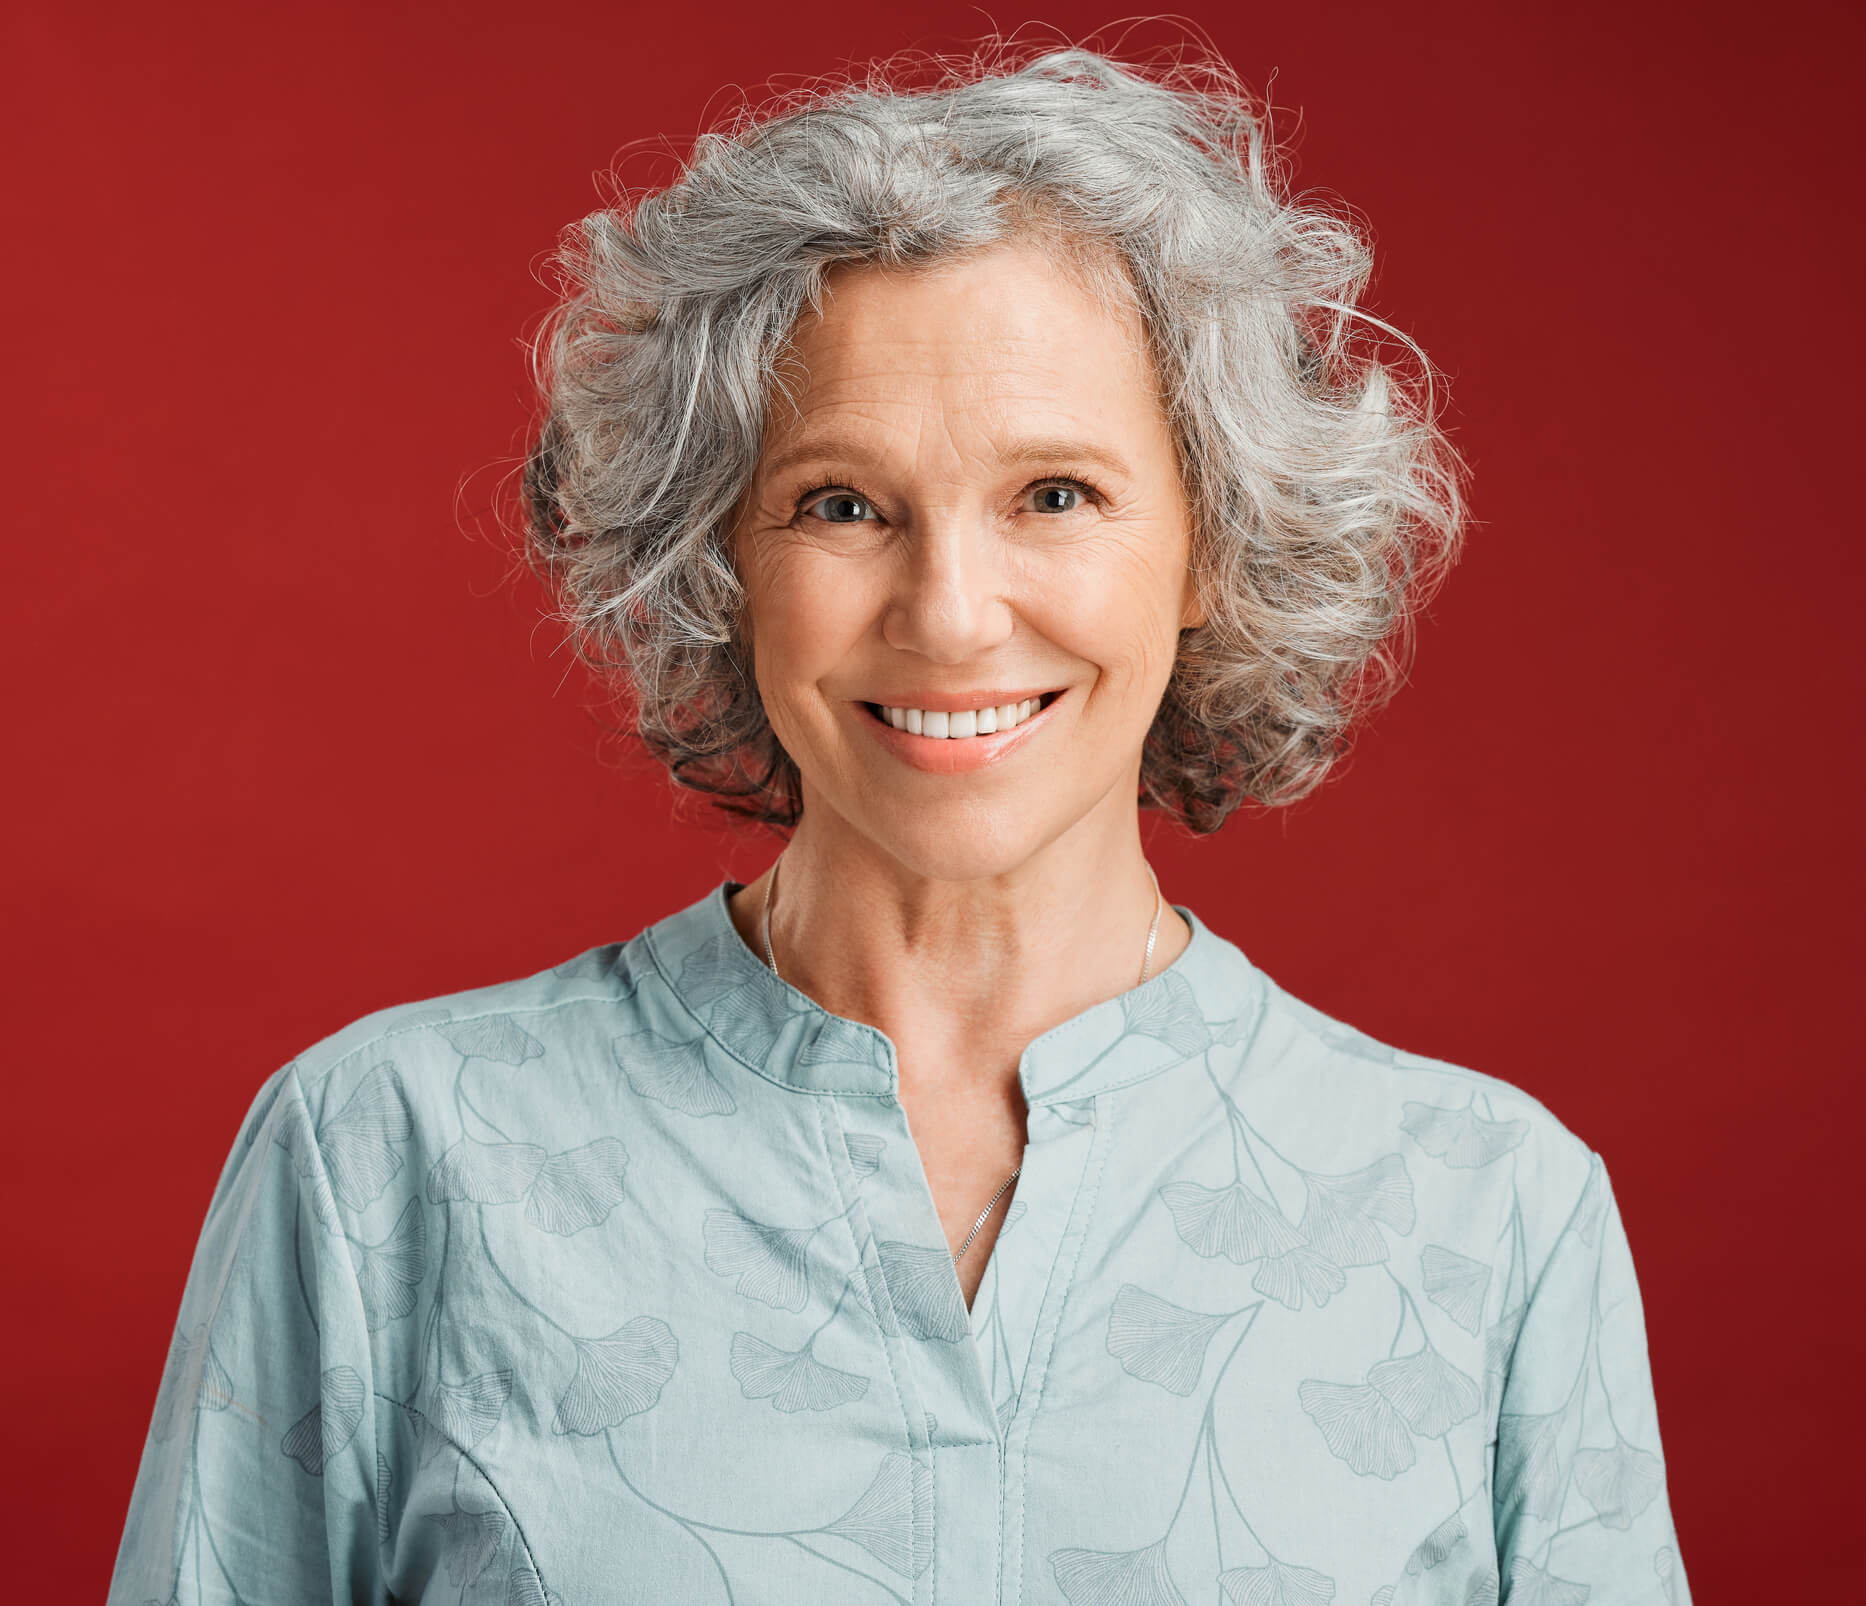 woman with gray hair smiling